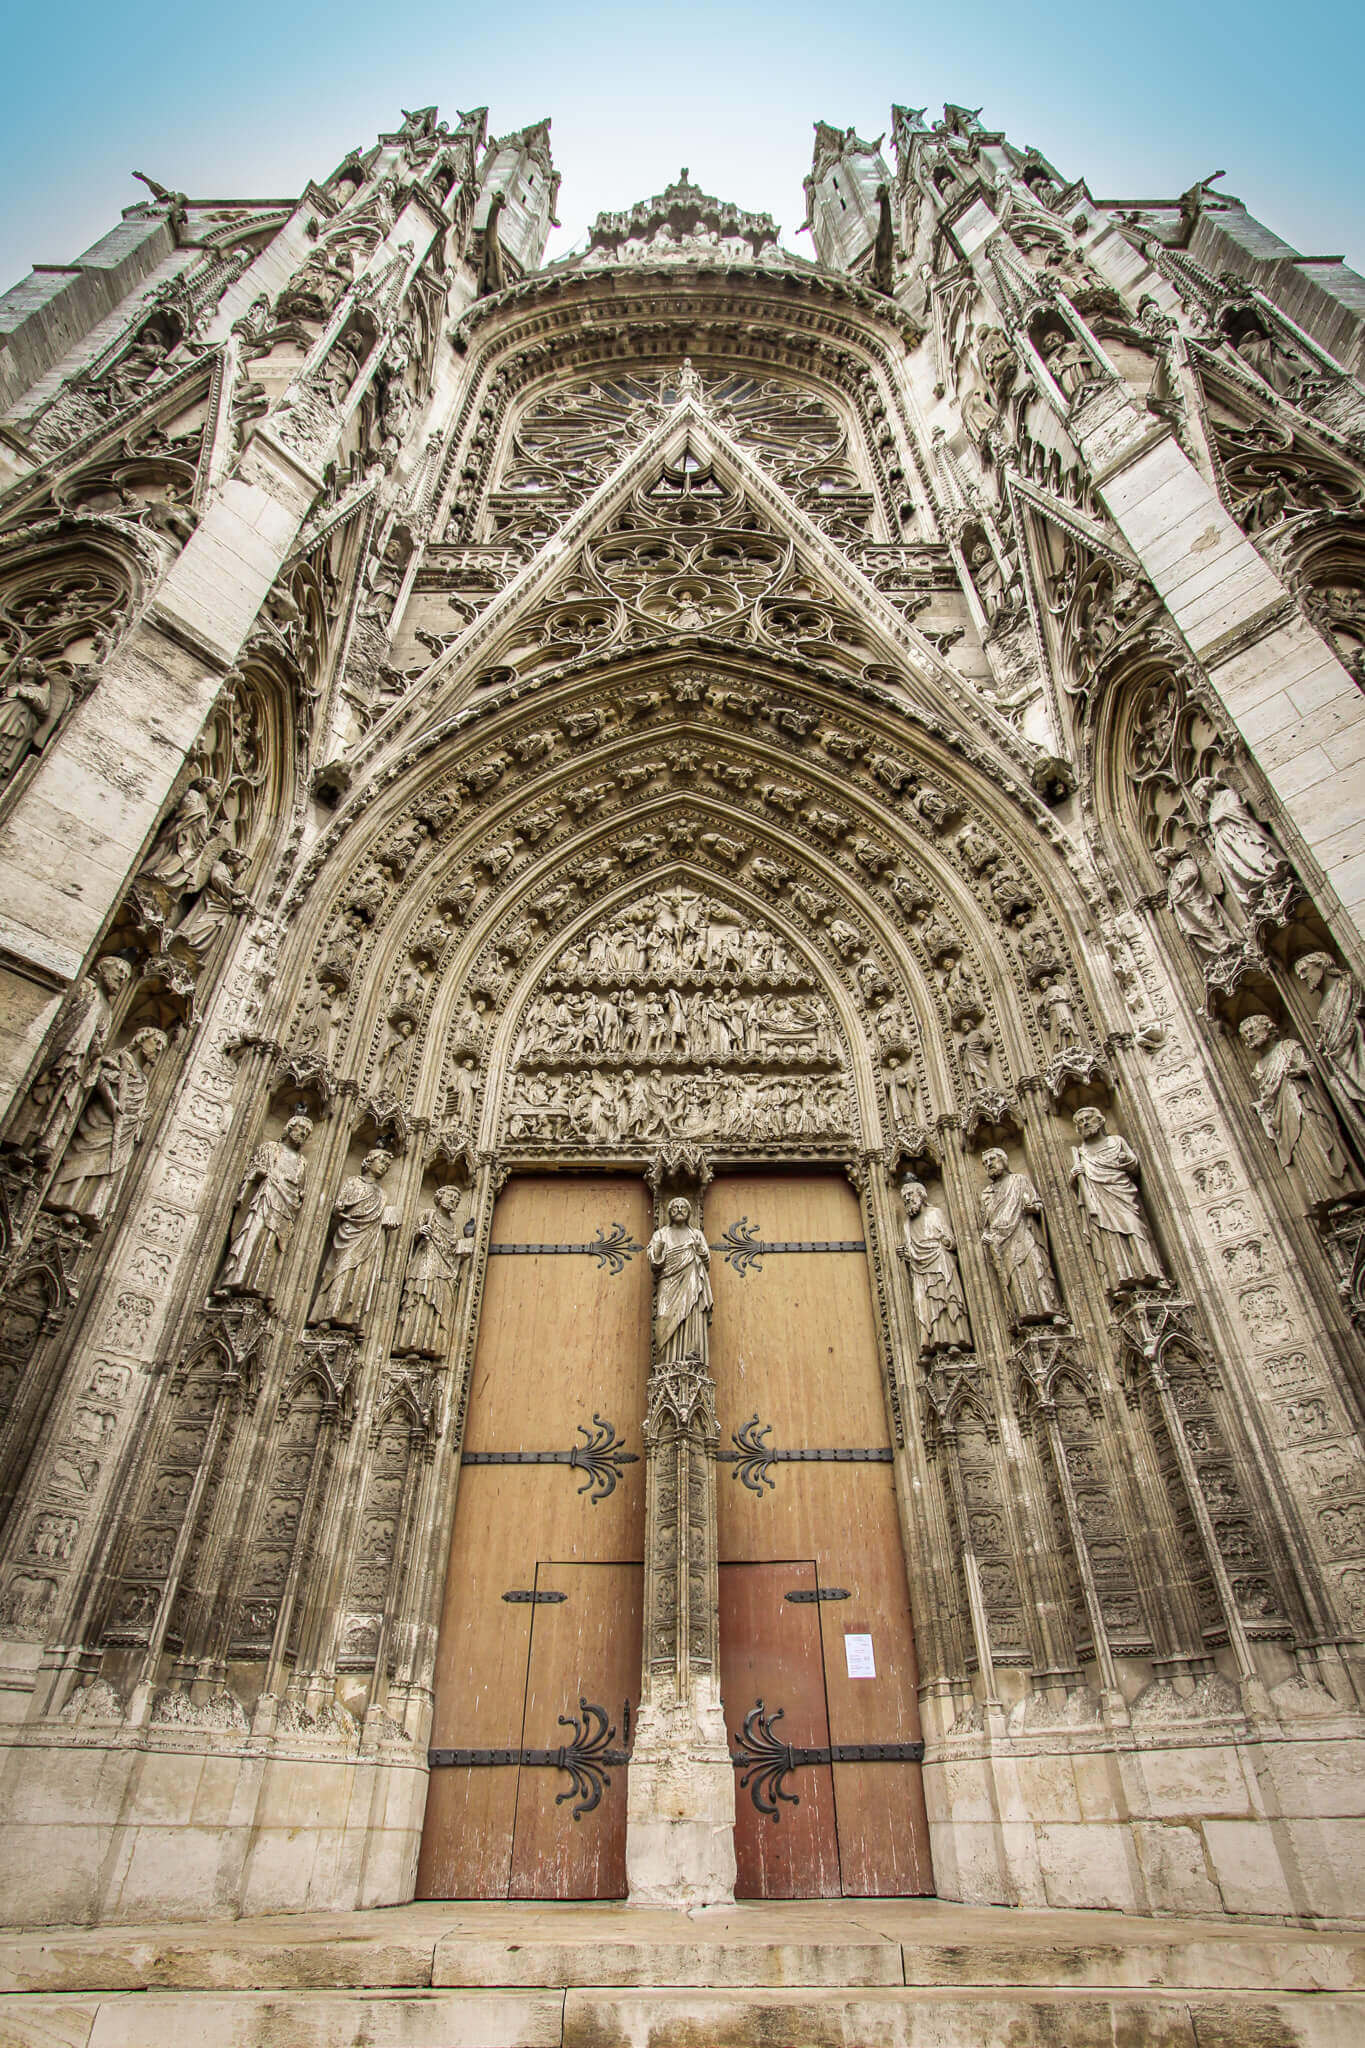 The doors of the Rouen Cathedral